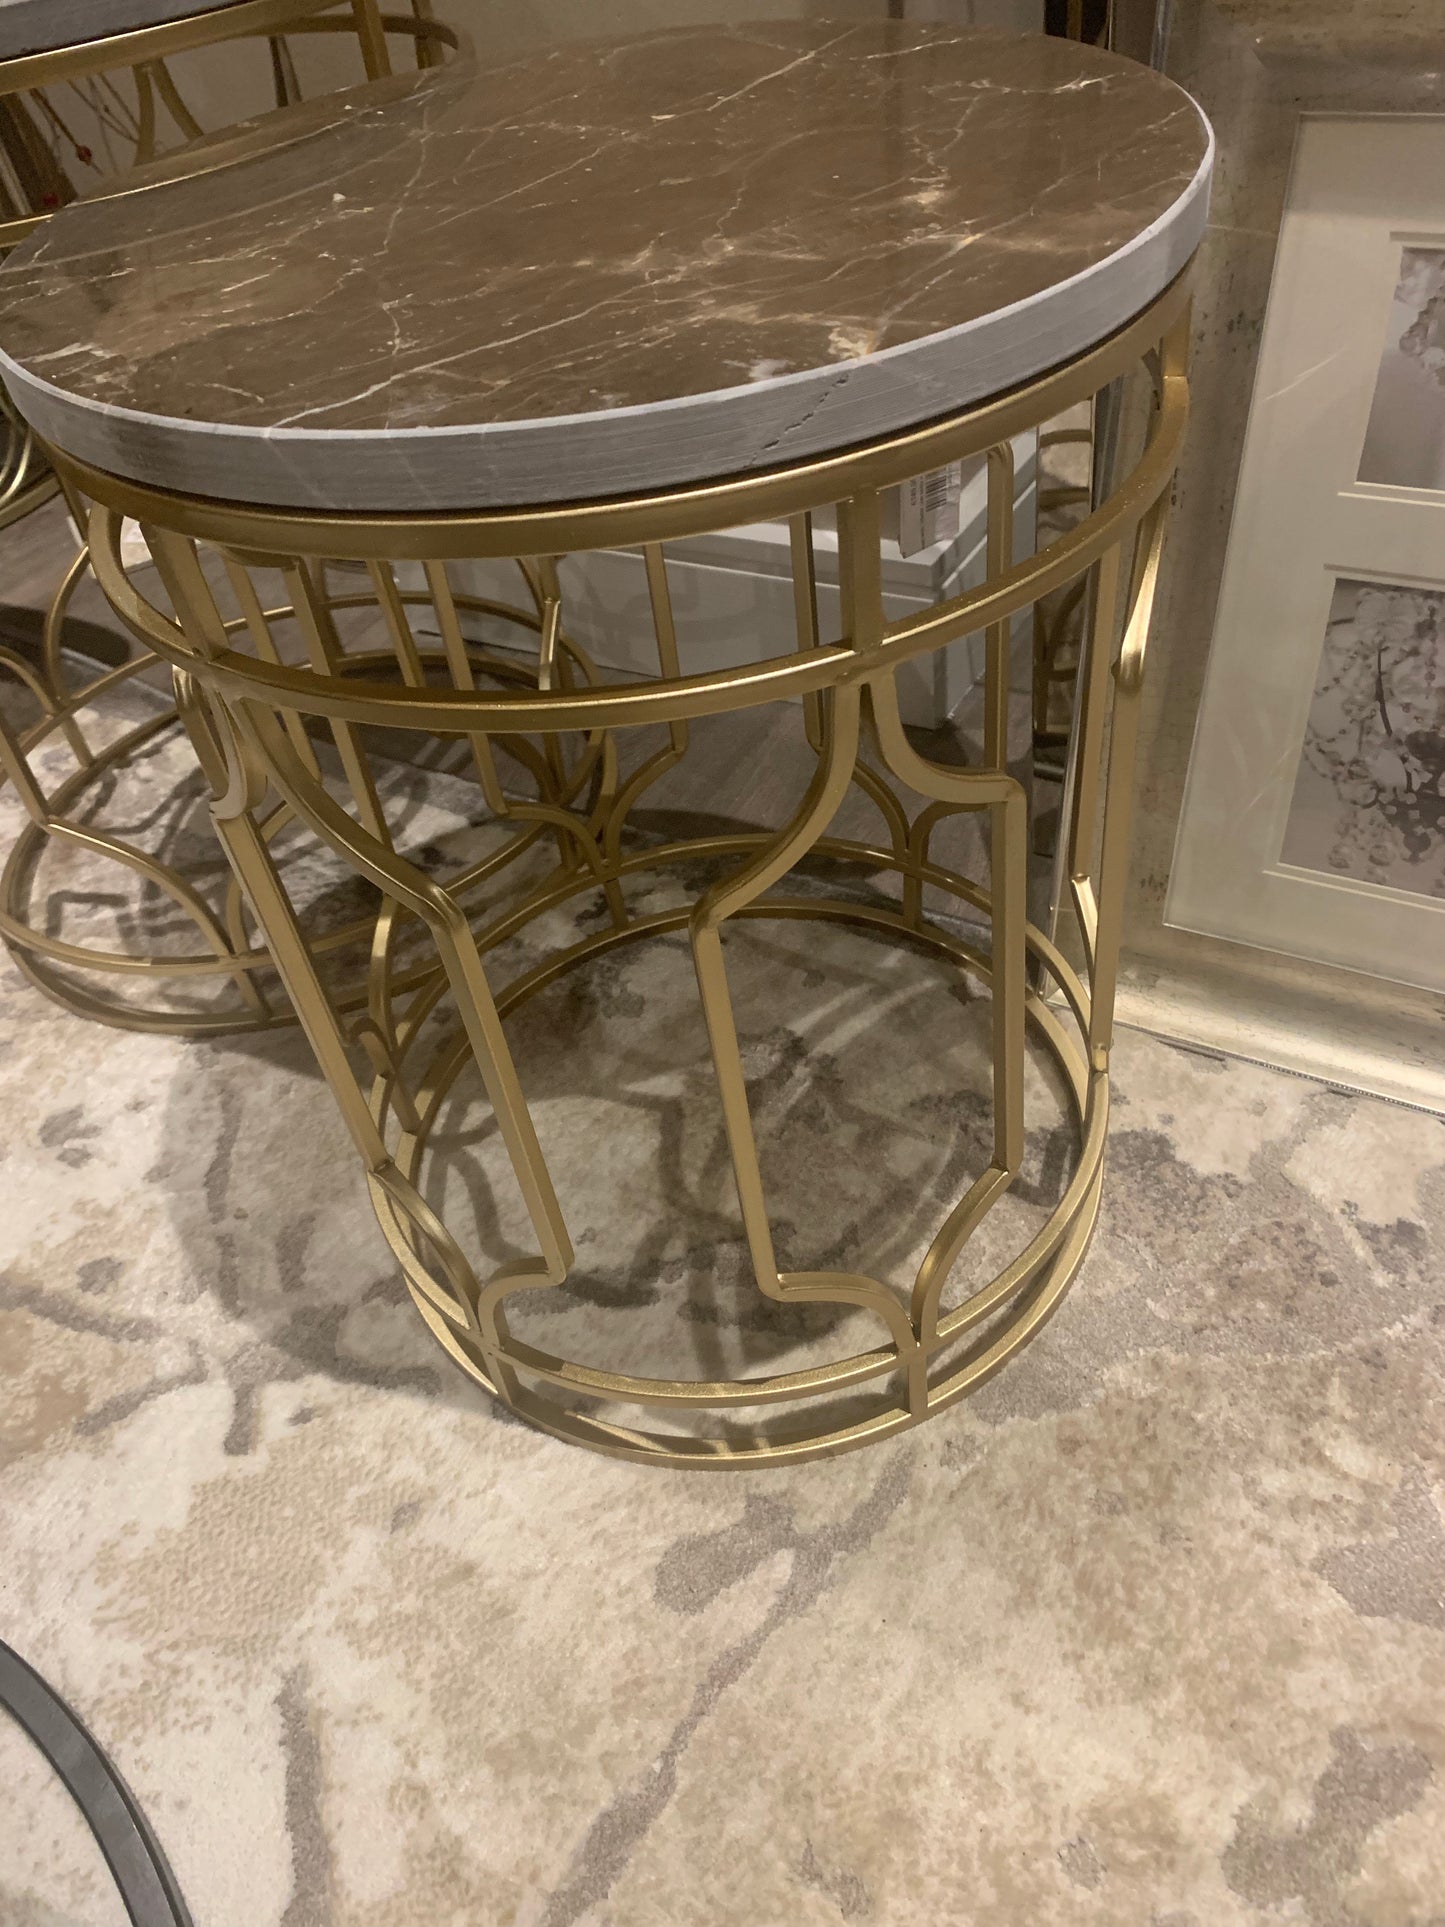 Marble and gold side table sold each reduced to clear